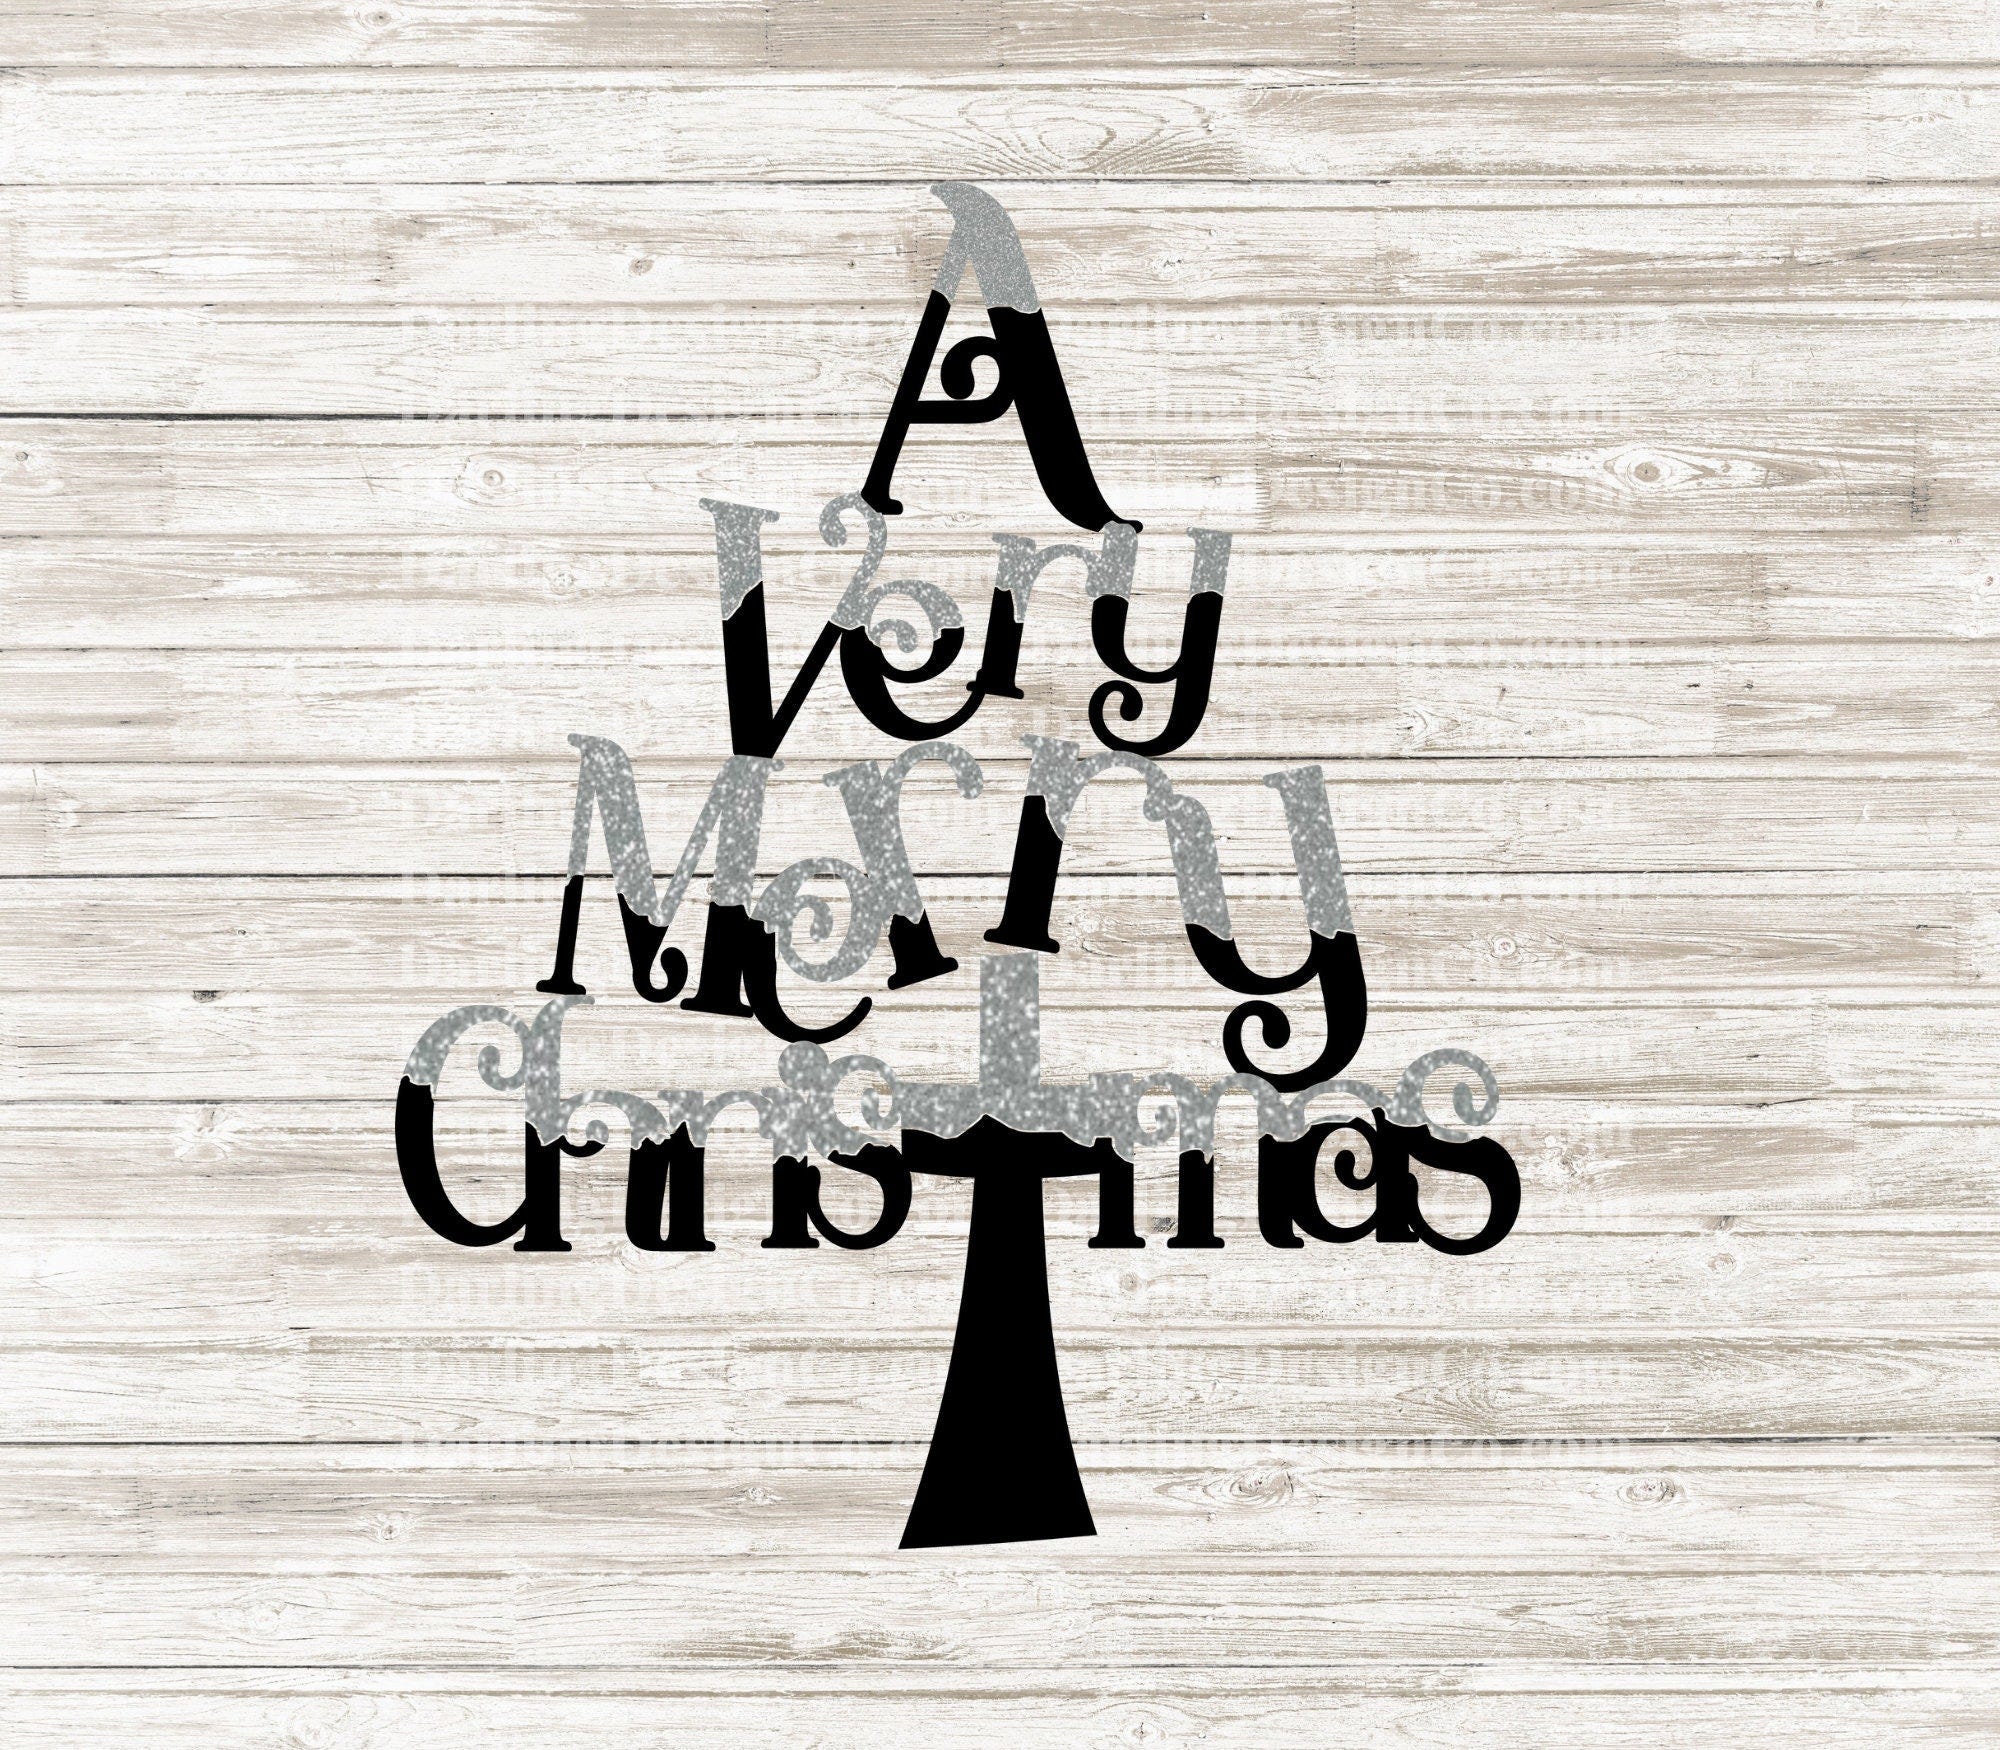 A Very Merry Christmas svg Christmas Tree svg Christmas Tree with Snow svg cut file for cricut or silhouette svg